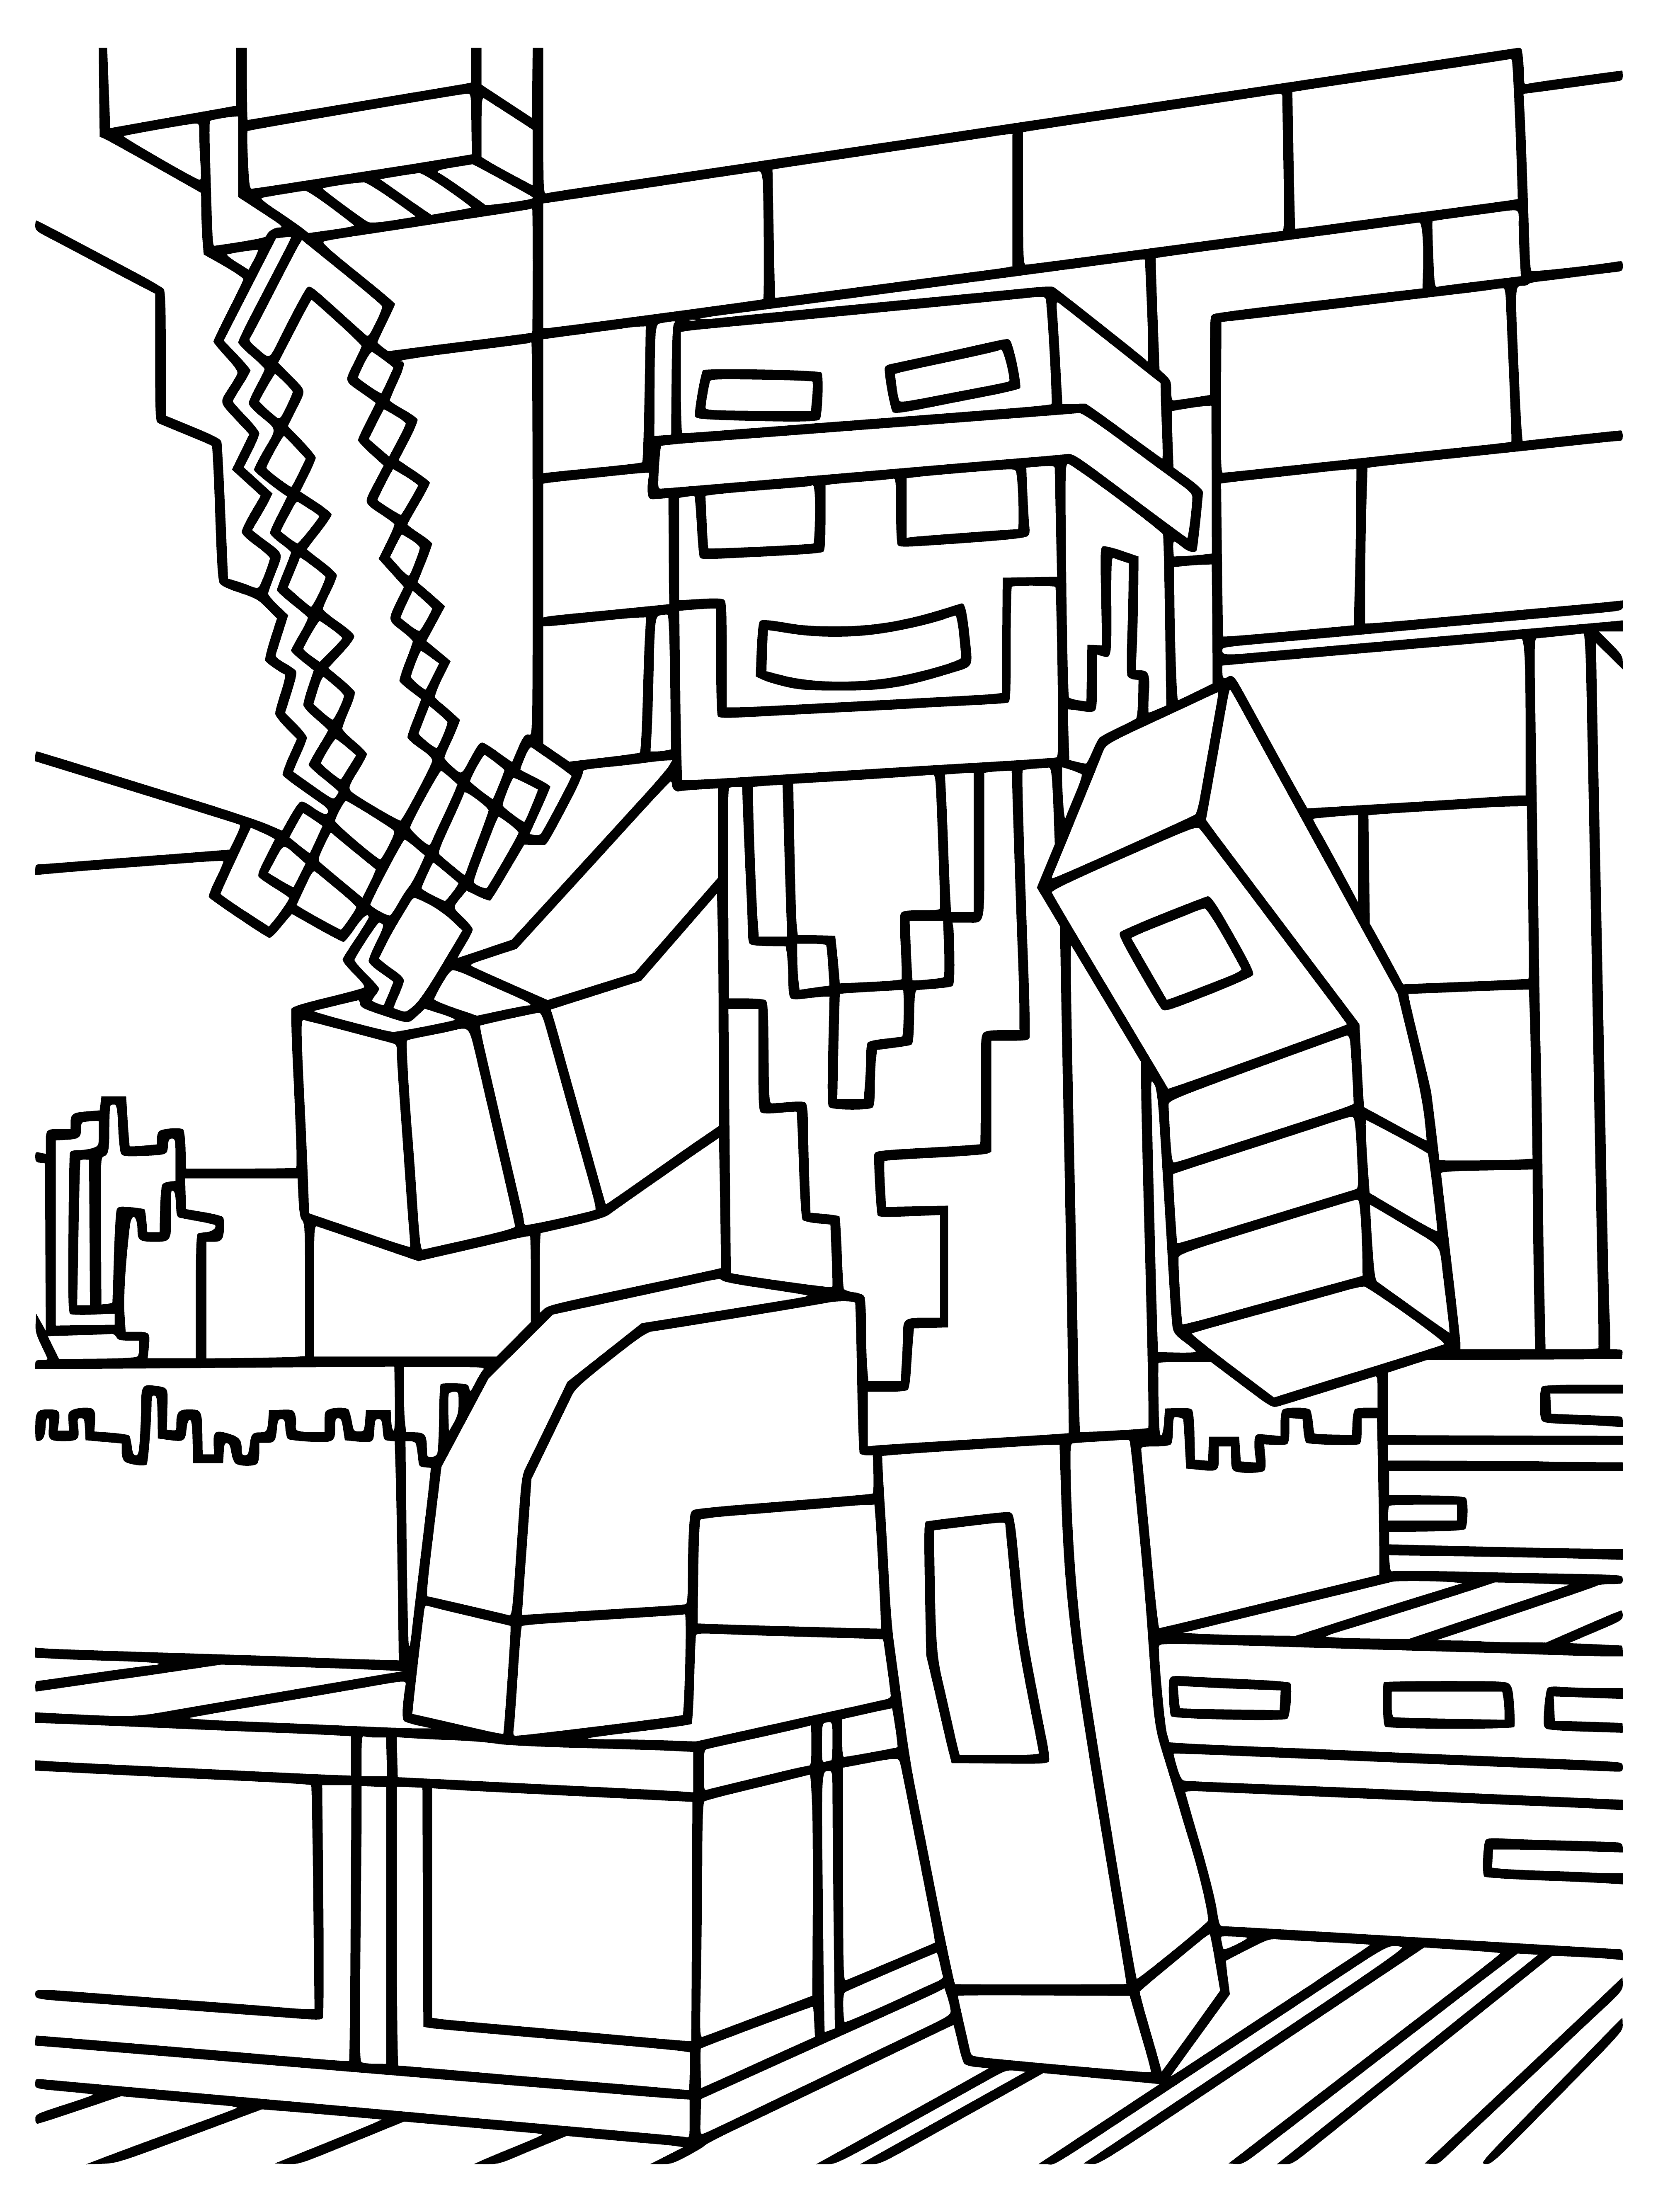 coloring page: Player stands on bridge over a river in Minecraft village with houses and farms.